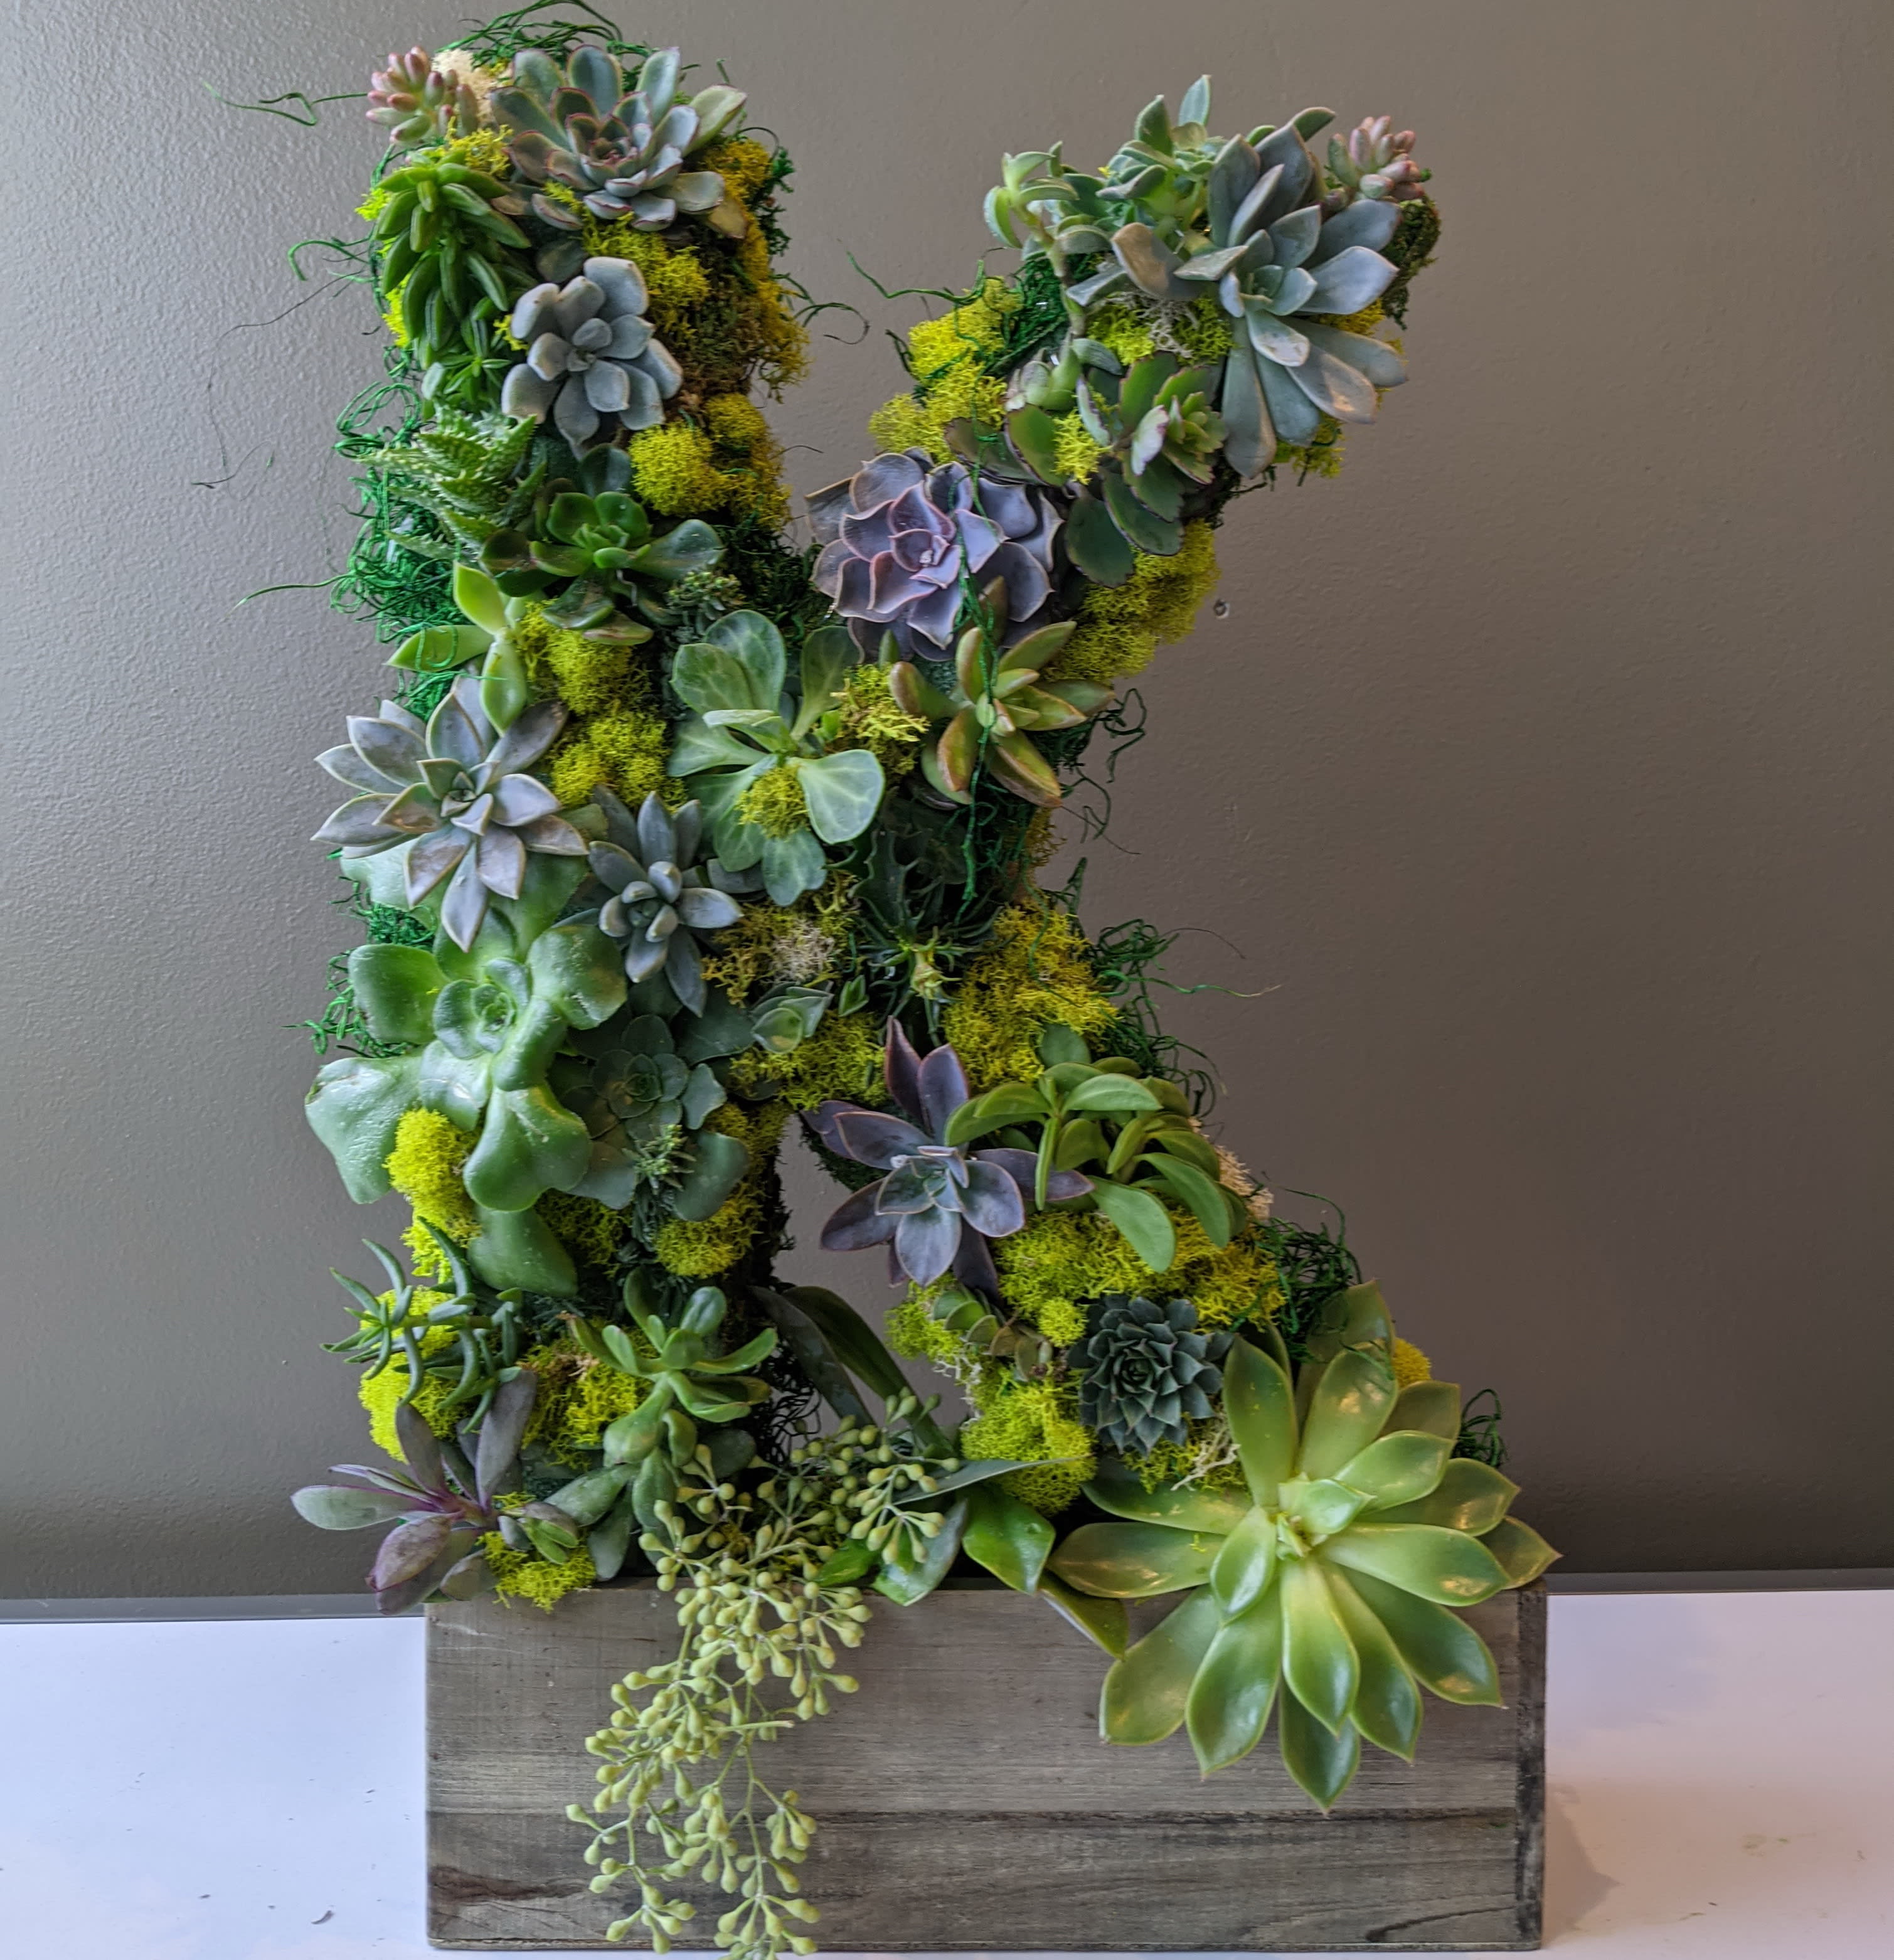 Succulicious Monogram Letter  - Give a custom made gift for someone special by sending the letter of their initials or special numbers!   Amazing summer succulents ,miniature air plants, and colorful fresh mosses make this gift totally unique!